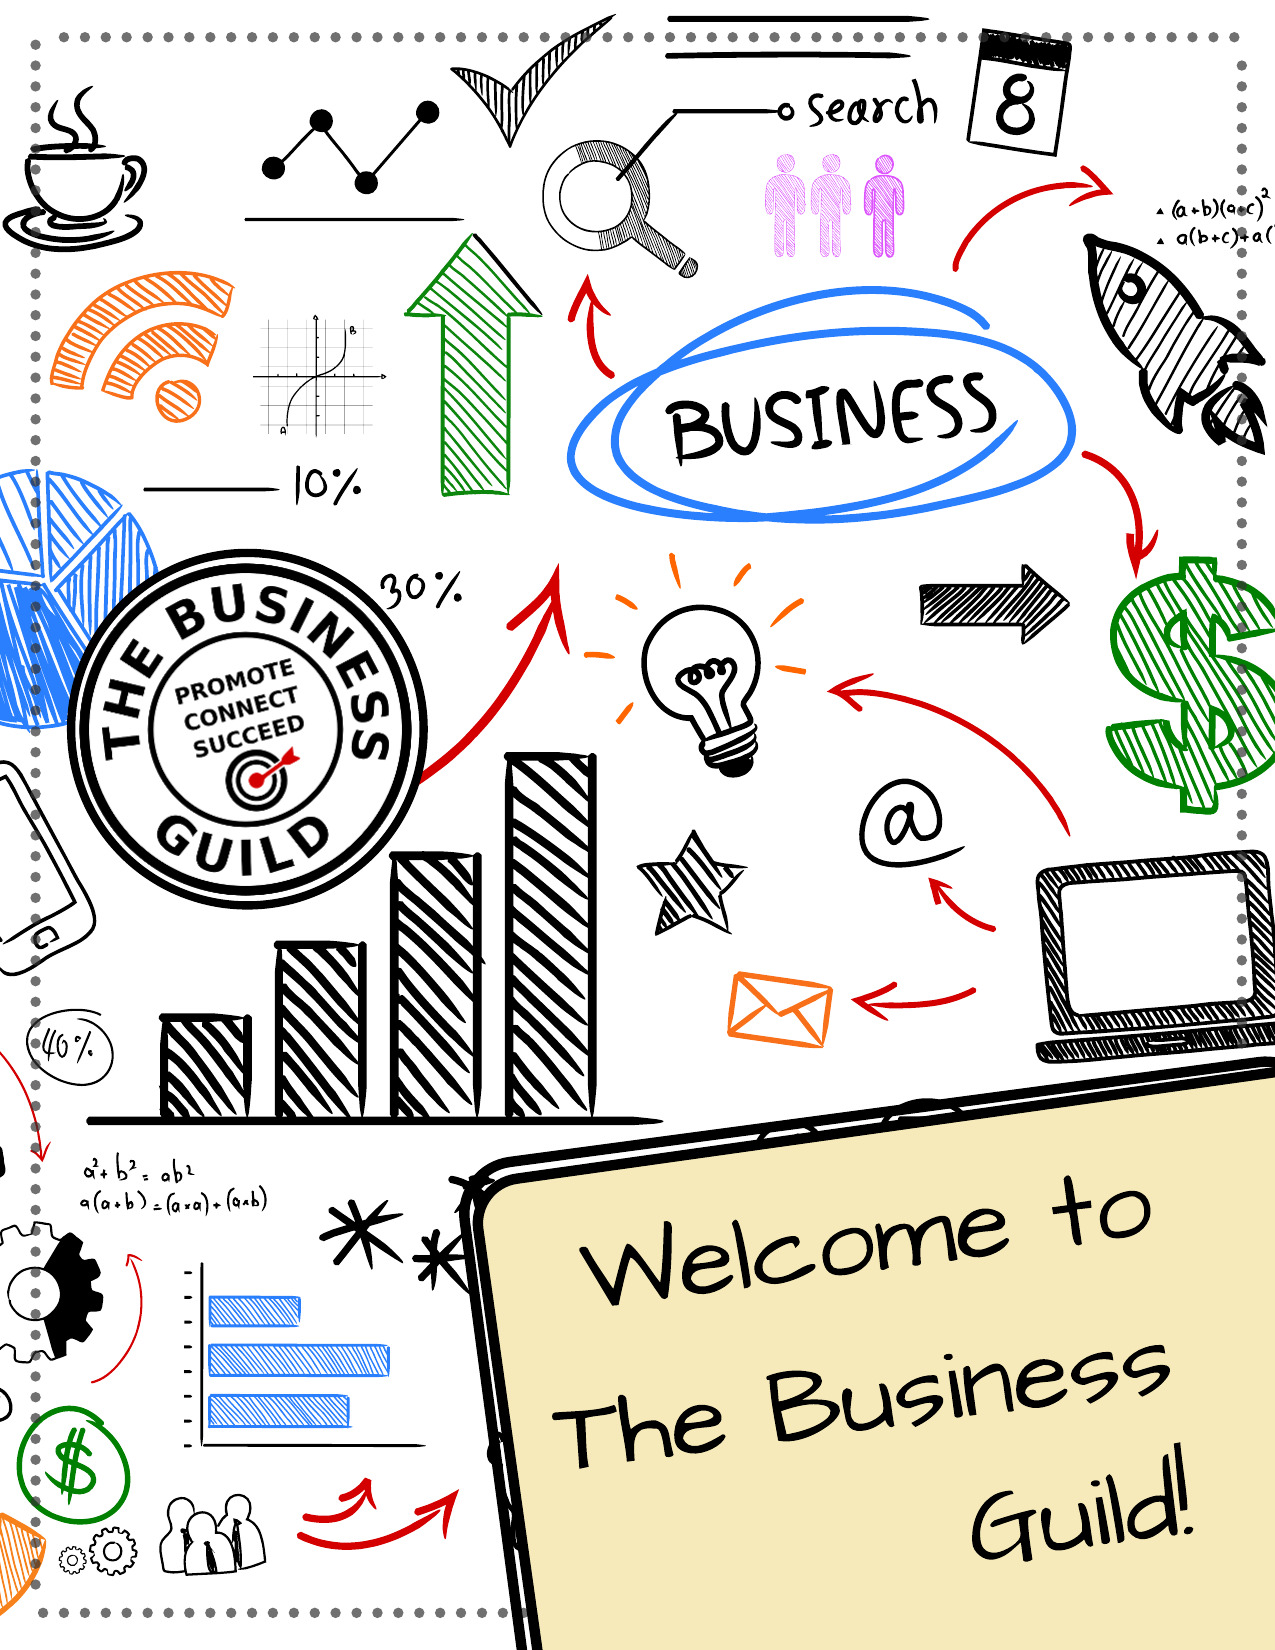 cover of Business Guild member guide with hand drawn business doodes